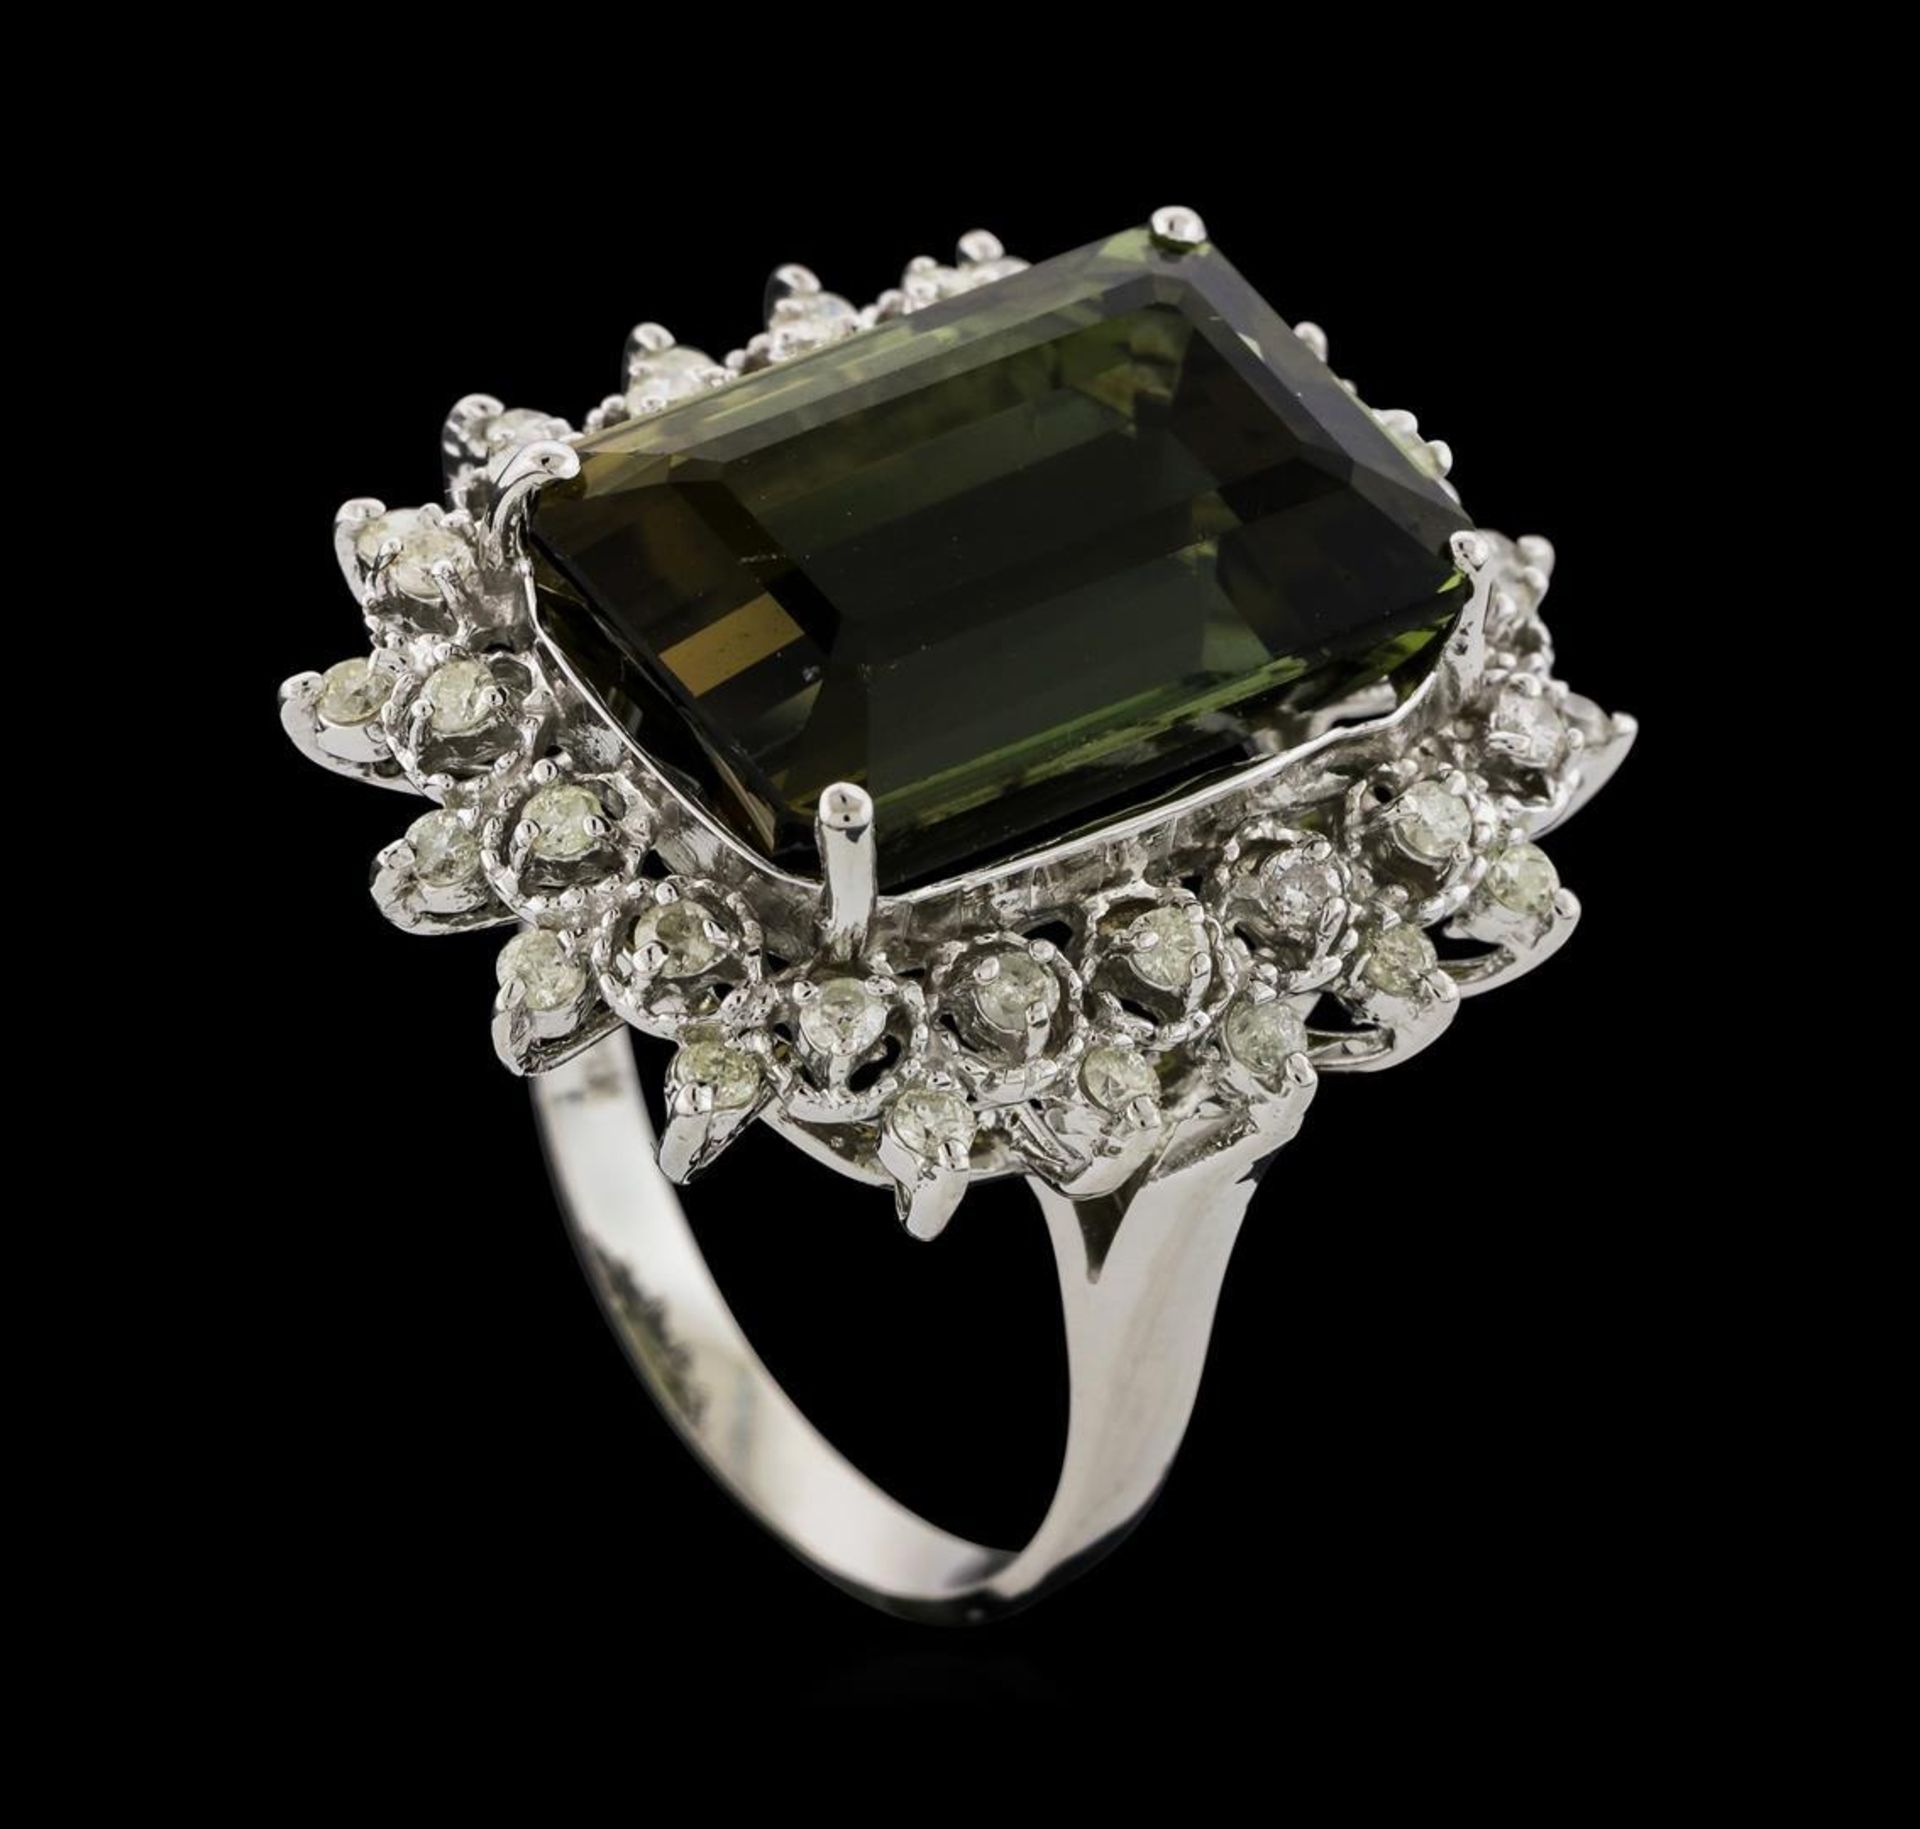 15.32 ctw Green Tourmaline and Diamond Ring - 14KT White Gold - Image 4 of 5